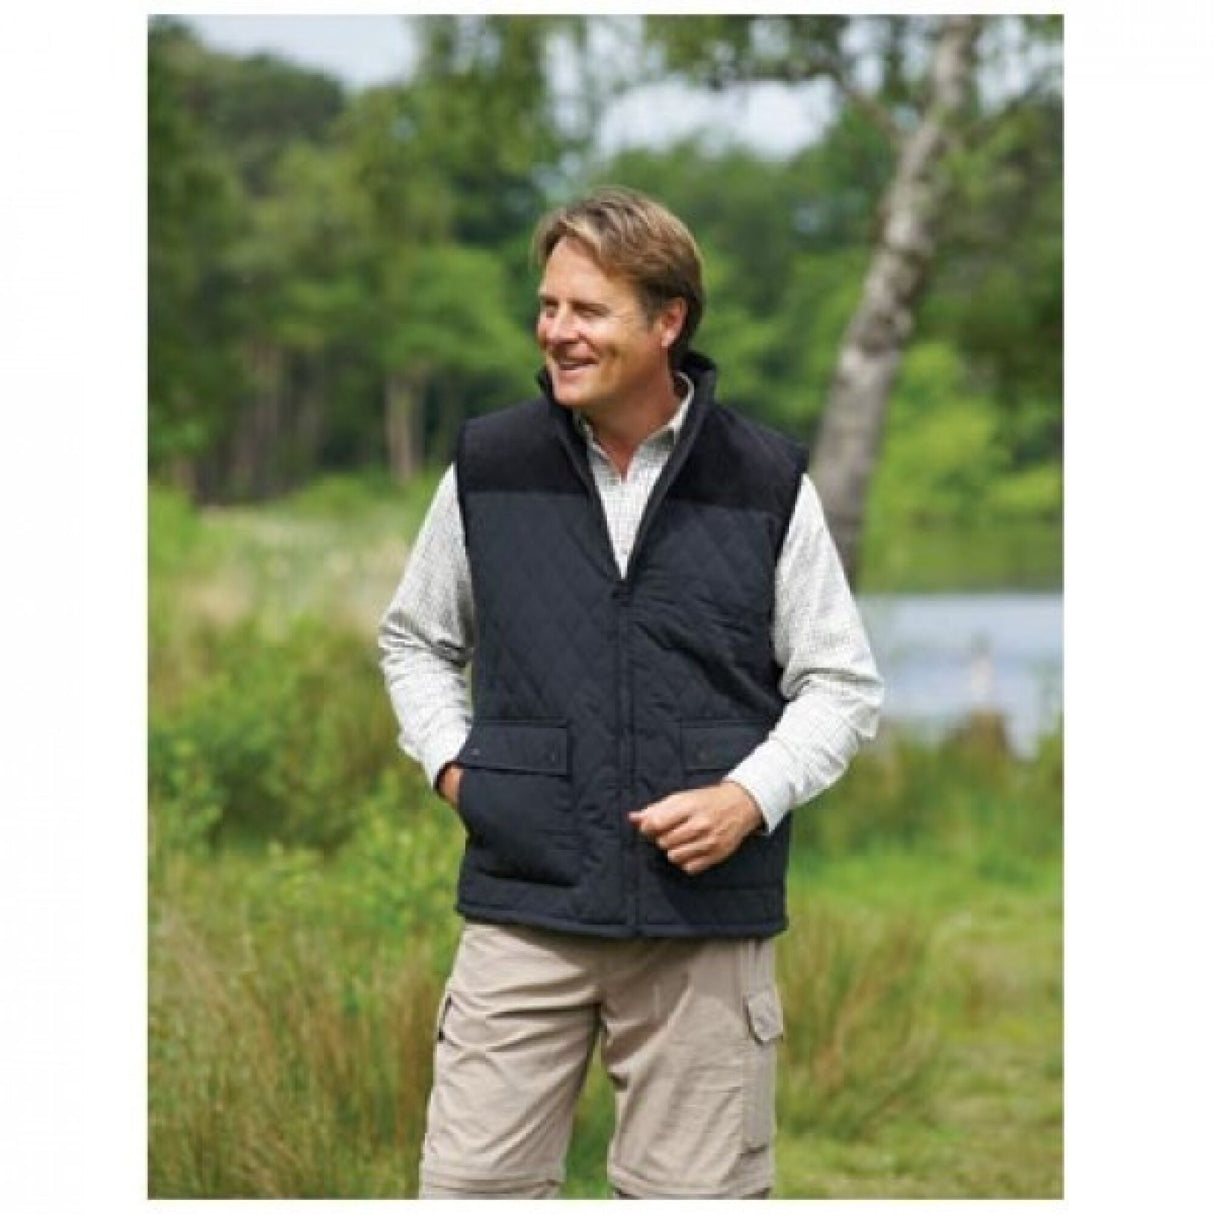 Country Estate Arundel Quilted Bodywarmer Black - Farming Parts